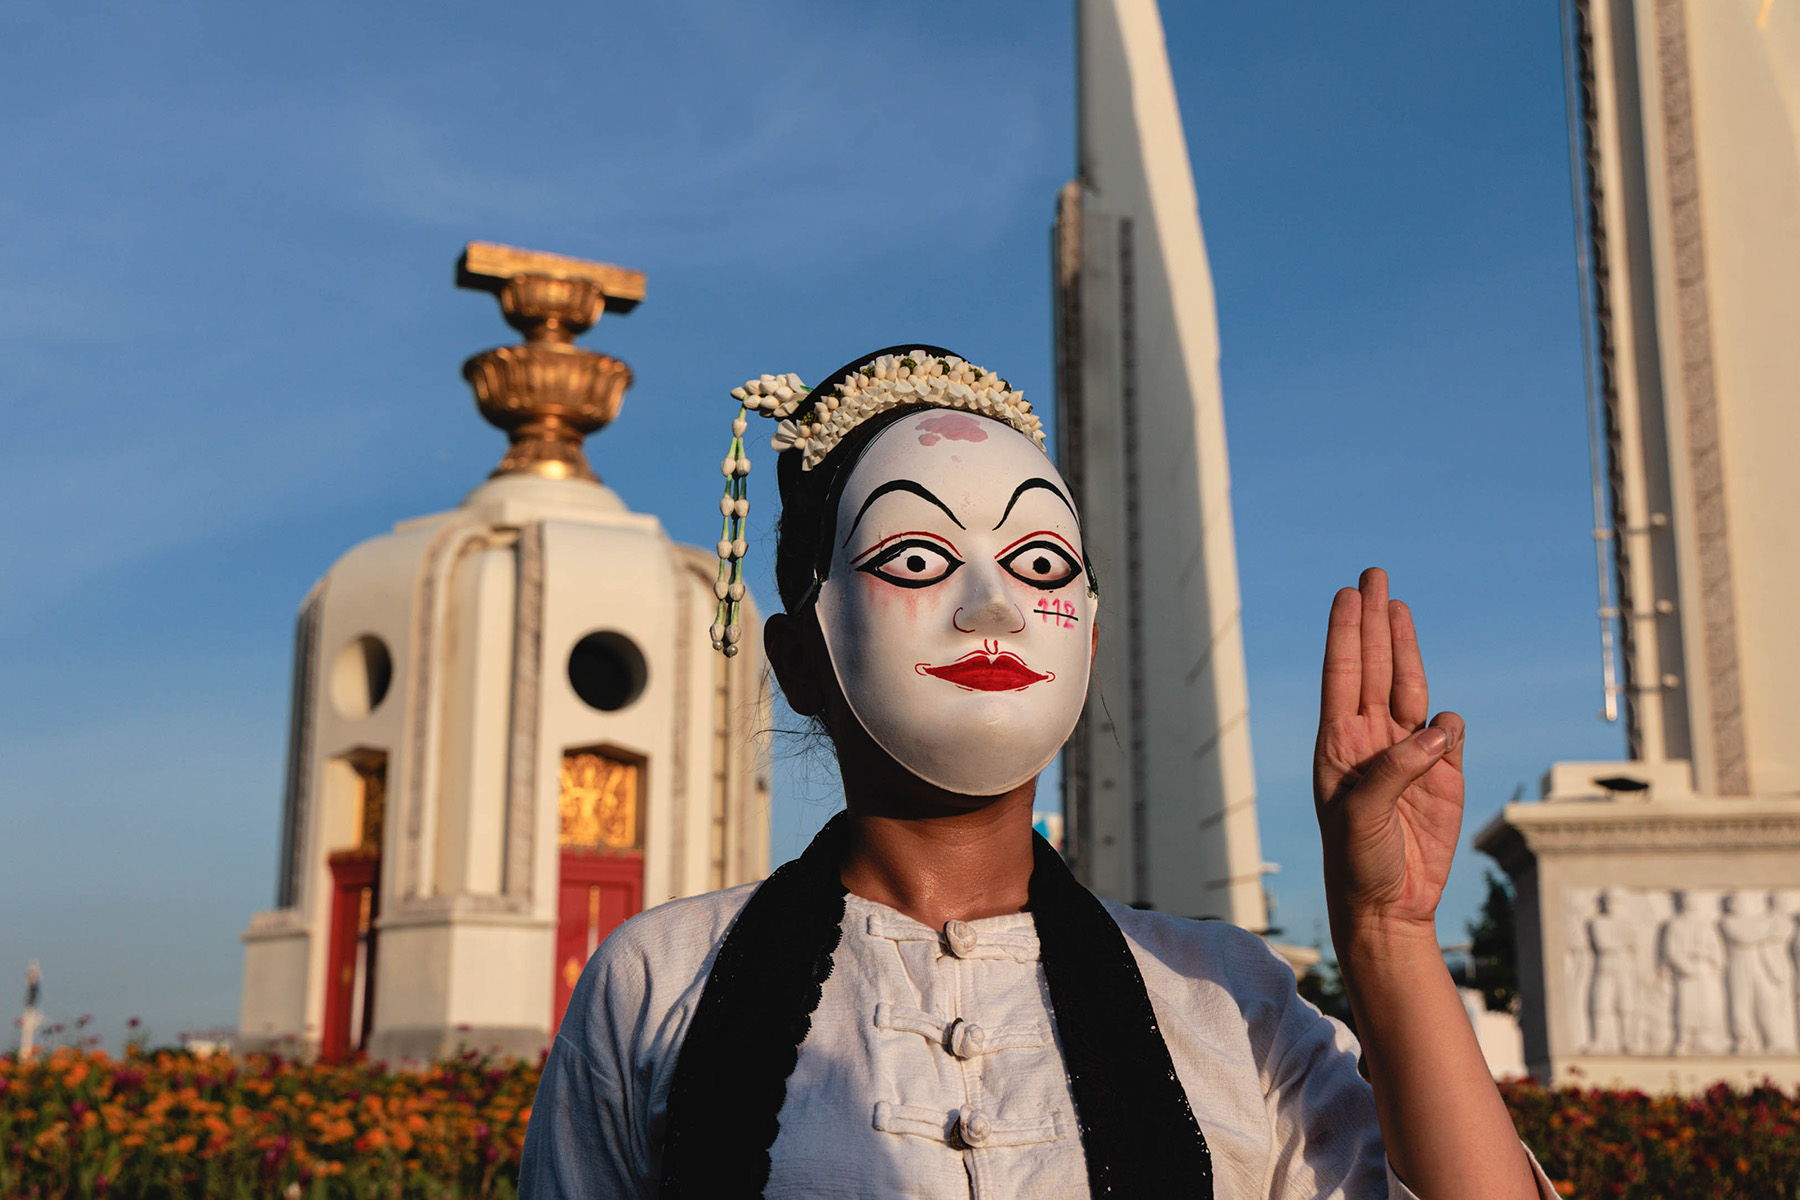 Protestor with a 'cursed mask' standing in front of the Democracy Monument in Bangkok. Their mask has 112 striped through, indicating their against the royal defamation law in Thailand.